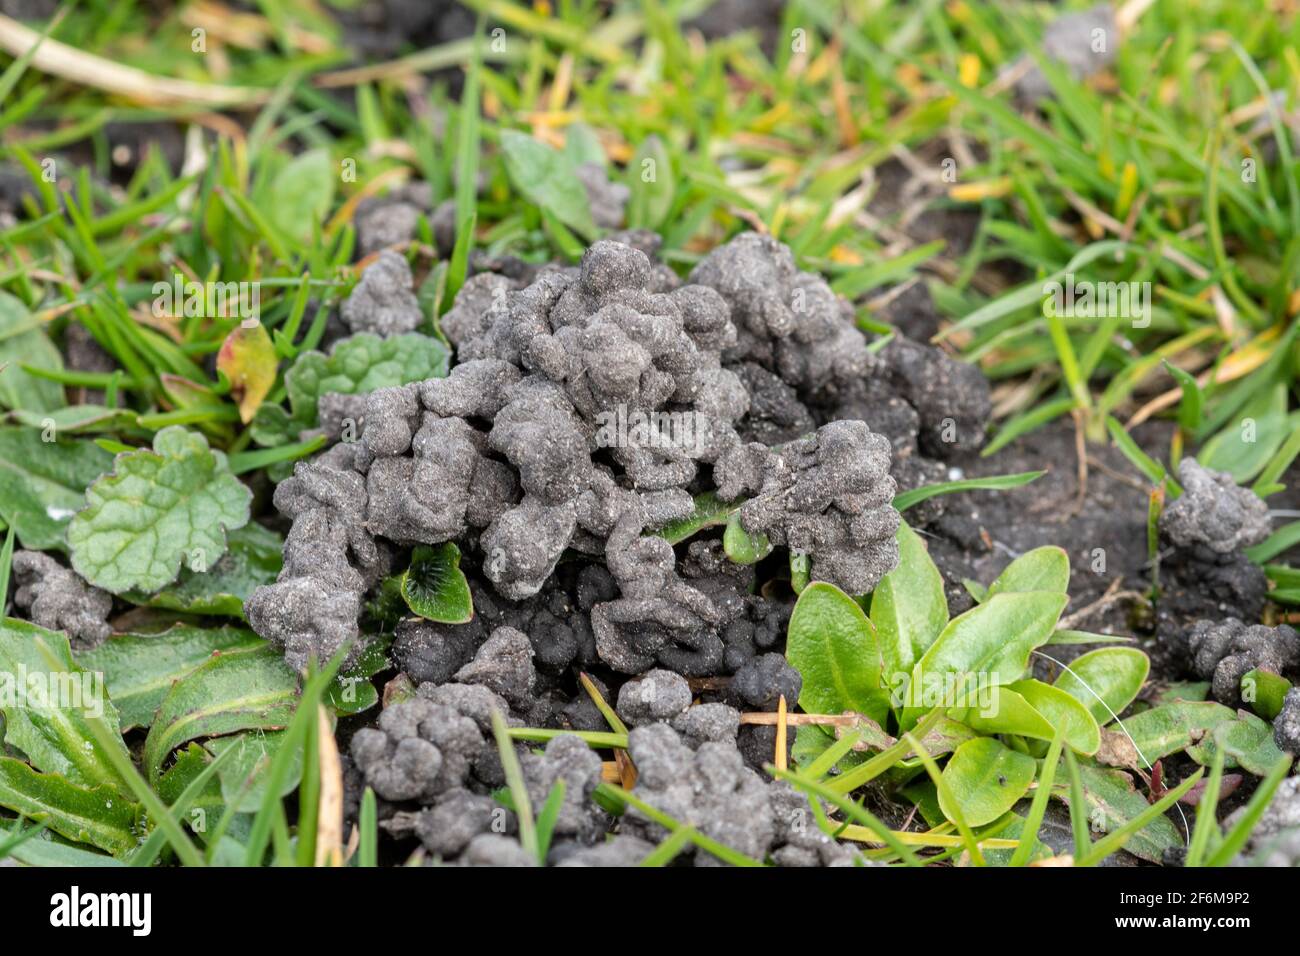 Worm casts on lawn, wormcast made by common earthworms, UK Stock Photo